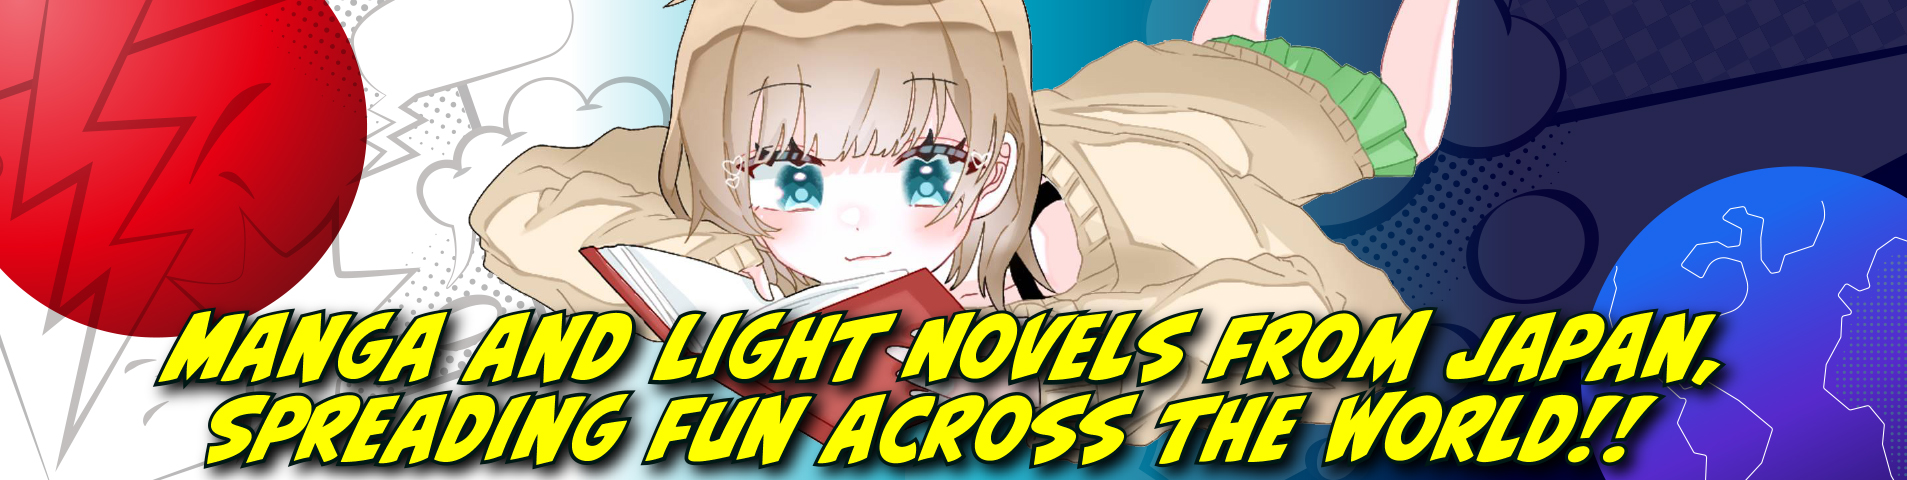 Manga and Light Novels from Japan,
Spreading fun across the world !!